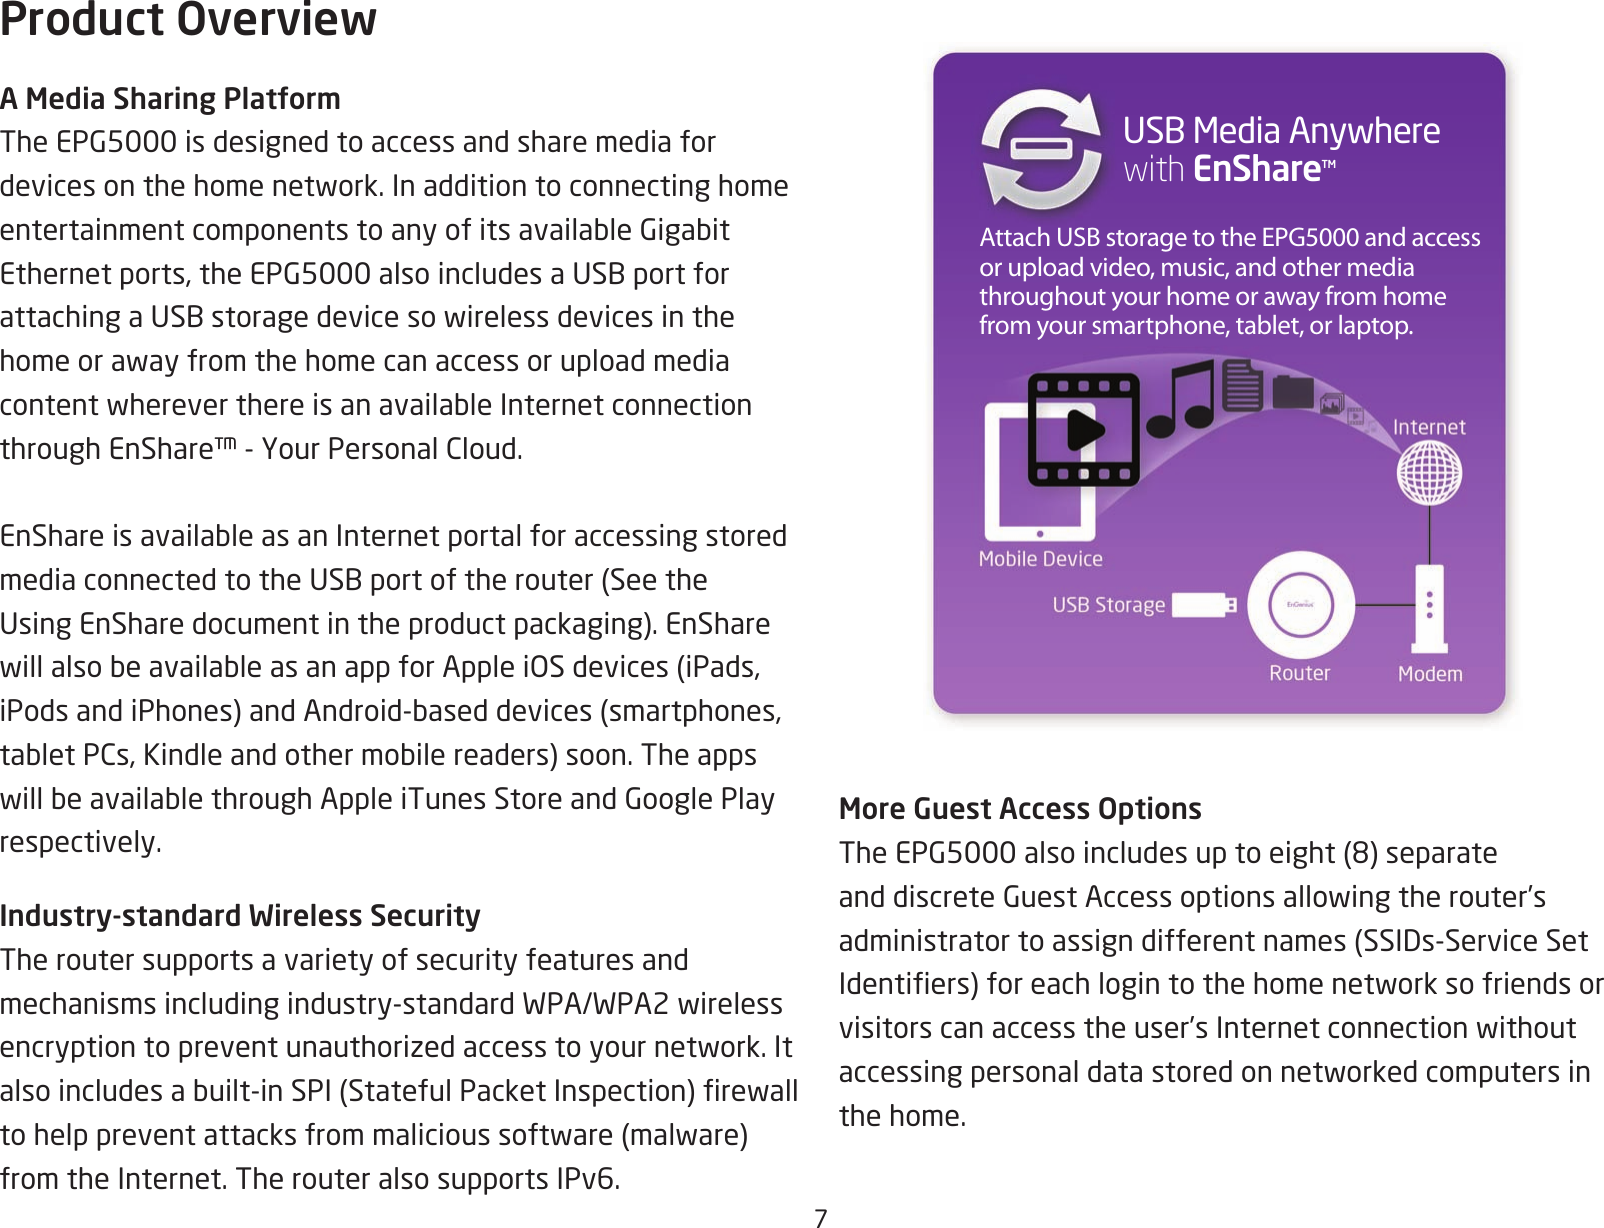 7Product OverviewA Media Sharing PlatformTheEPG5000isdesignedtoaccessandsharemediafordevicesonthehomenetwork.InadditiontoconnectinghomeentertainmentcomponentstoanyofitsavailableGigabitEthernetports,theEPG5000alsoincludesaUSBportforattachingaUSBstoragedevicesowirelessdevicesinthehomeorawayfromthehomecanaccessoruploadmediacontentwhereverthereisanavailableInternetconnectionthroughEnShare™-YourPersonalCloud.EnShareisavailableasanInternetportalforaccessingstoredmediaconnectedtotheUSBportoftherouter(SeetheUsingEnSharedocumentintheproductpackaging).EnSharewillalsobeavailableasanappforAppleiOSdevices(iPads,iPodsandiPhones)andAndroid-baseddevices(smartphones,tabletPCs,Kindleandothermobilereaders)soon.TheappswillbeavailablethroughAppleiTunesStoreandGooglePlayrespectively.Industry-standard Wireless SecurityThe router supports a variety of security features and mechanismsincludingindustry-standardWPA/WPA2wirelessencryptiontopreventunauthorizedaccesstoyournetwork.Italsoincludesabuilt-inSPI(StatefulPacketInspection)rewalltohelppreventattacksfrommalicioussoftware(malware)from the Internet. The router also supports IPv6.Attach USB storage to the EPG5000 and access or upload video, music, and other media throughout your home or away from home from your smartphone, tablet, or laptop.USBMediaAnywhere with EnShareTMMore Guest Access OptionsTheEPG5000alsoincludesuptoeight(8)separateanddiscreteGuestAccessoptionsallowingtherouter’sadministratortoassigndifferentnames(SSIDs-ServiceSetIdentiers)foreachlogintothehomenetworksofriendsorvisitorscanaccesstheuser’sInternetconnectionwithoutaccessingpersonaldatastoredonnetworkedcomputersinthe home.